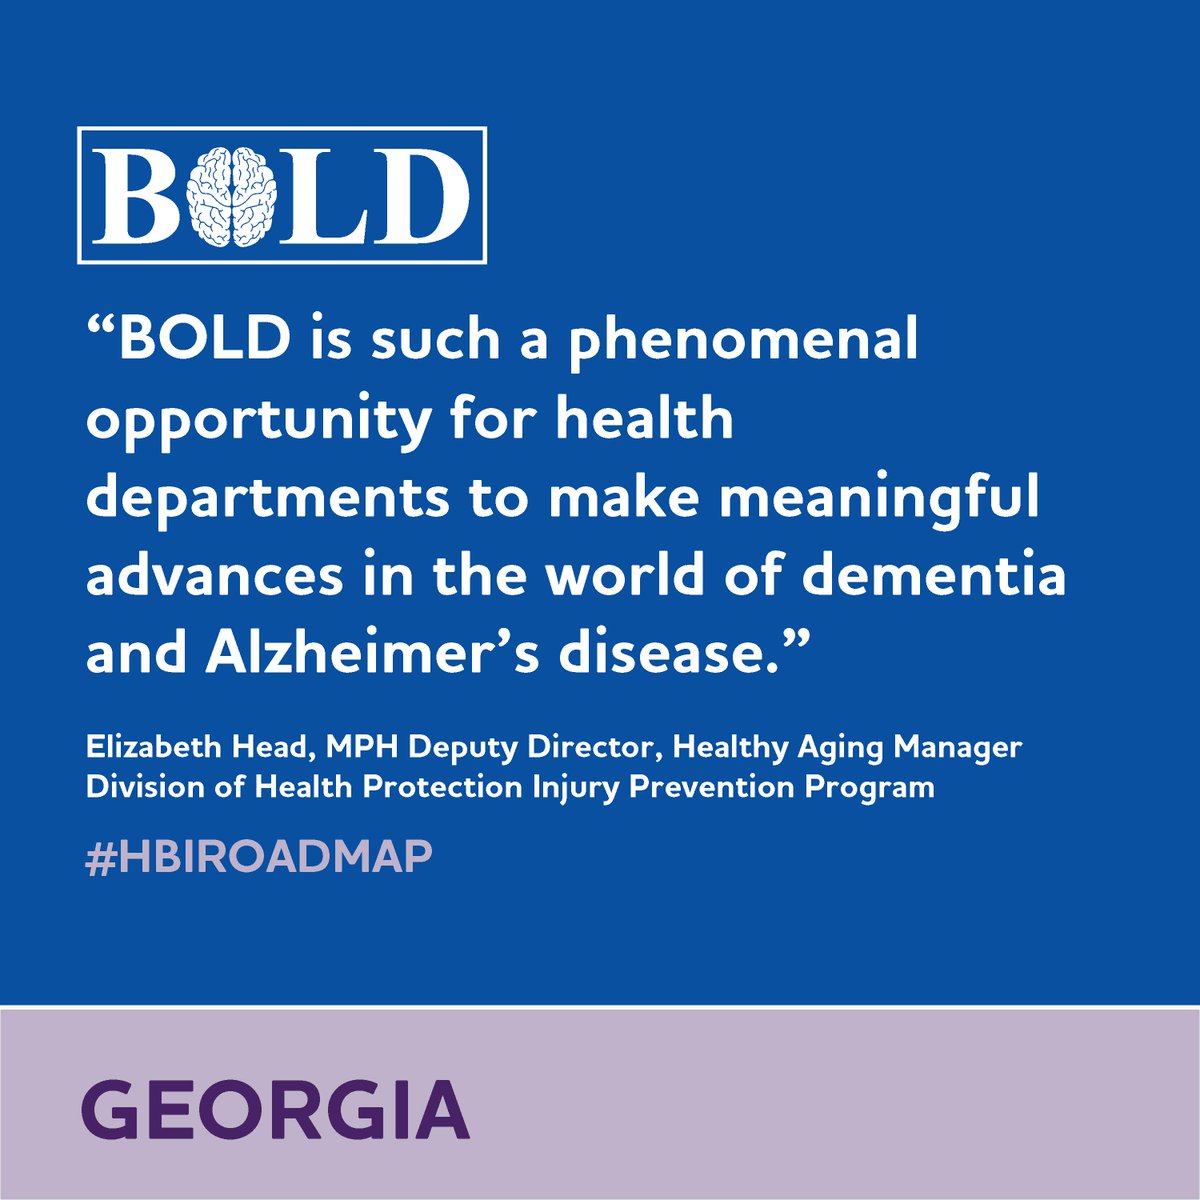 Thanks to the #BOLDAlzheimersAct, public health departments at state, local, and tribal levels are creating the necessary infrastructure to address Alzheimer’s and dementia in their communities.